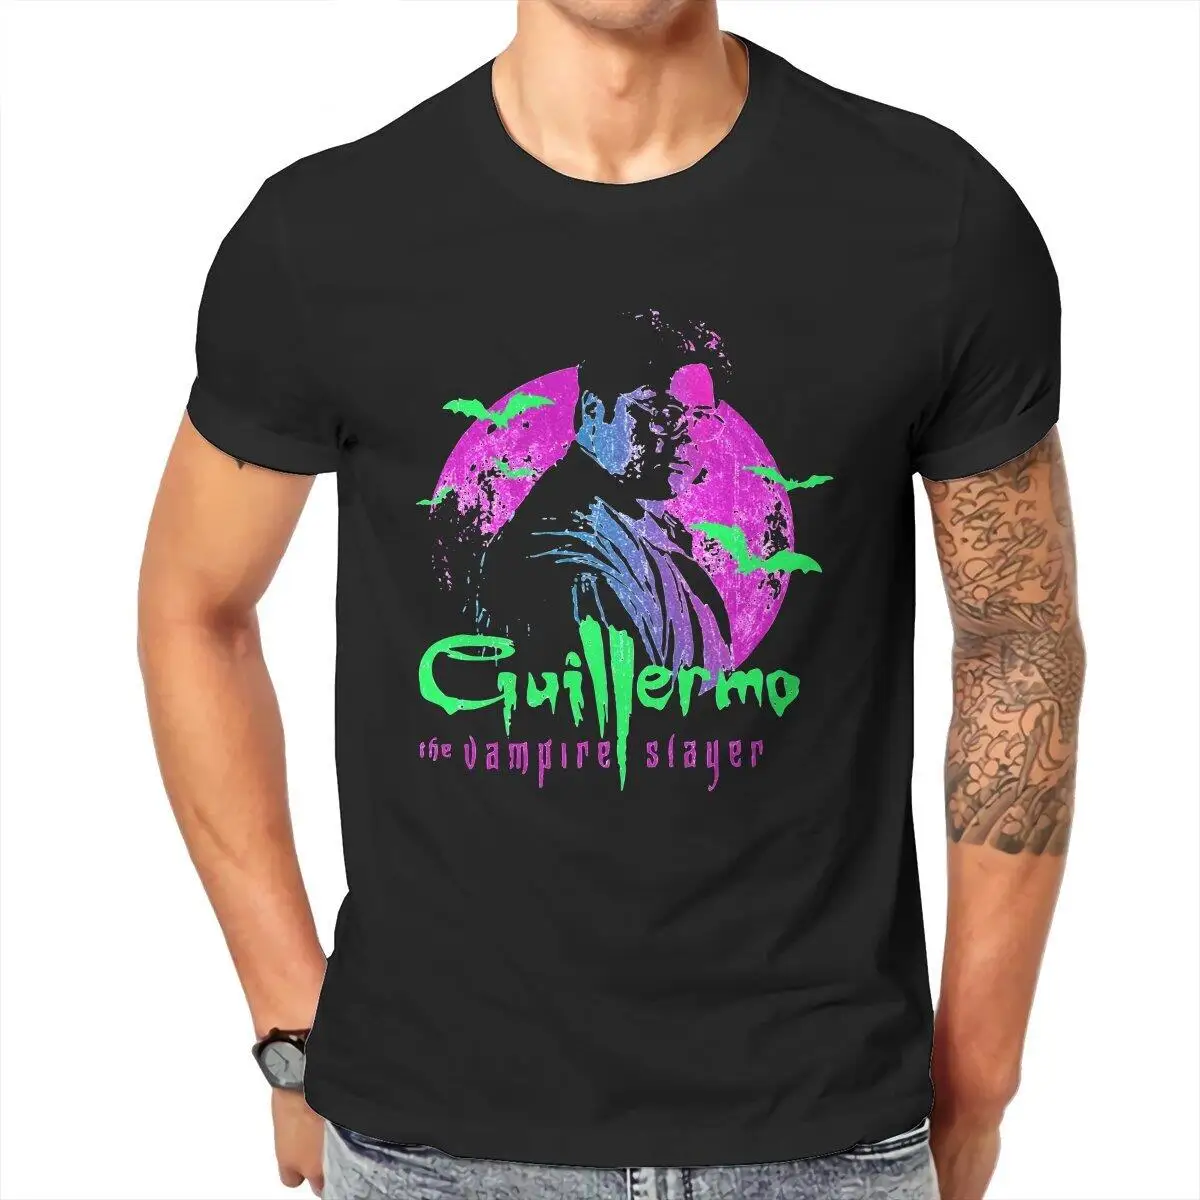 Men's T-Shirt Vampire Slayer Guillermo Cotton Tees Short Sleeve What We Do in the Shadows T Shirts Round Neck Tops 4XL 5XL 6XL